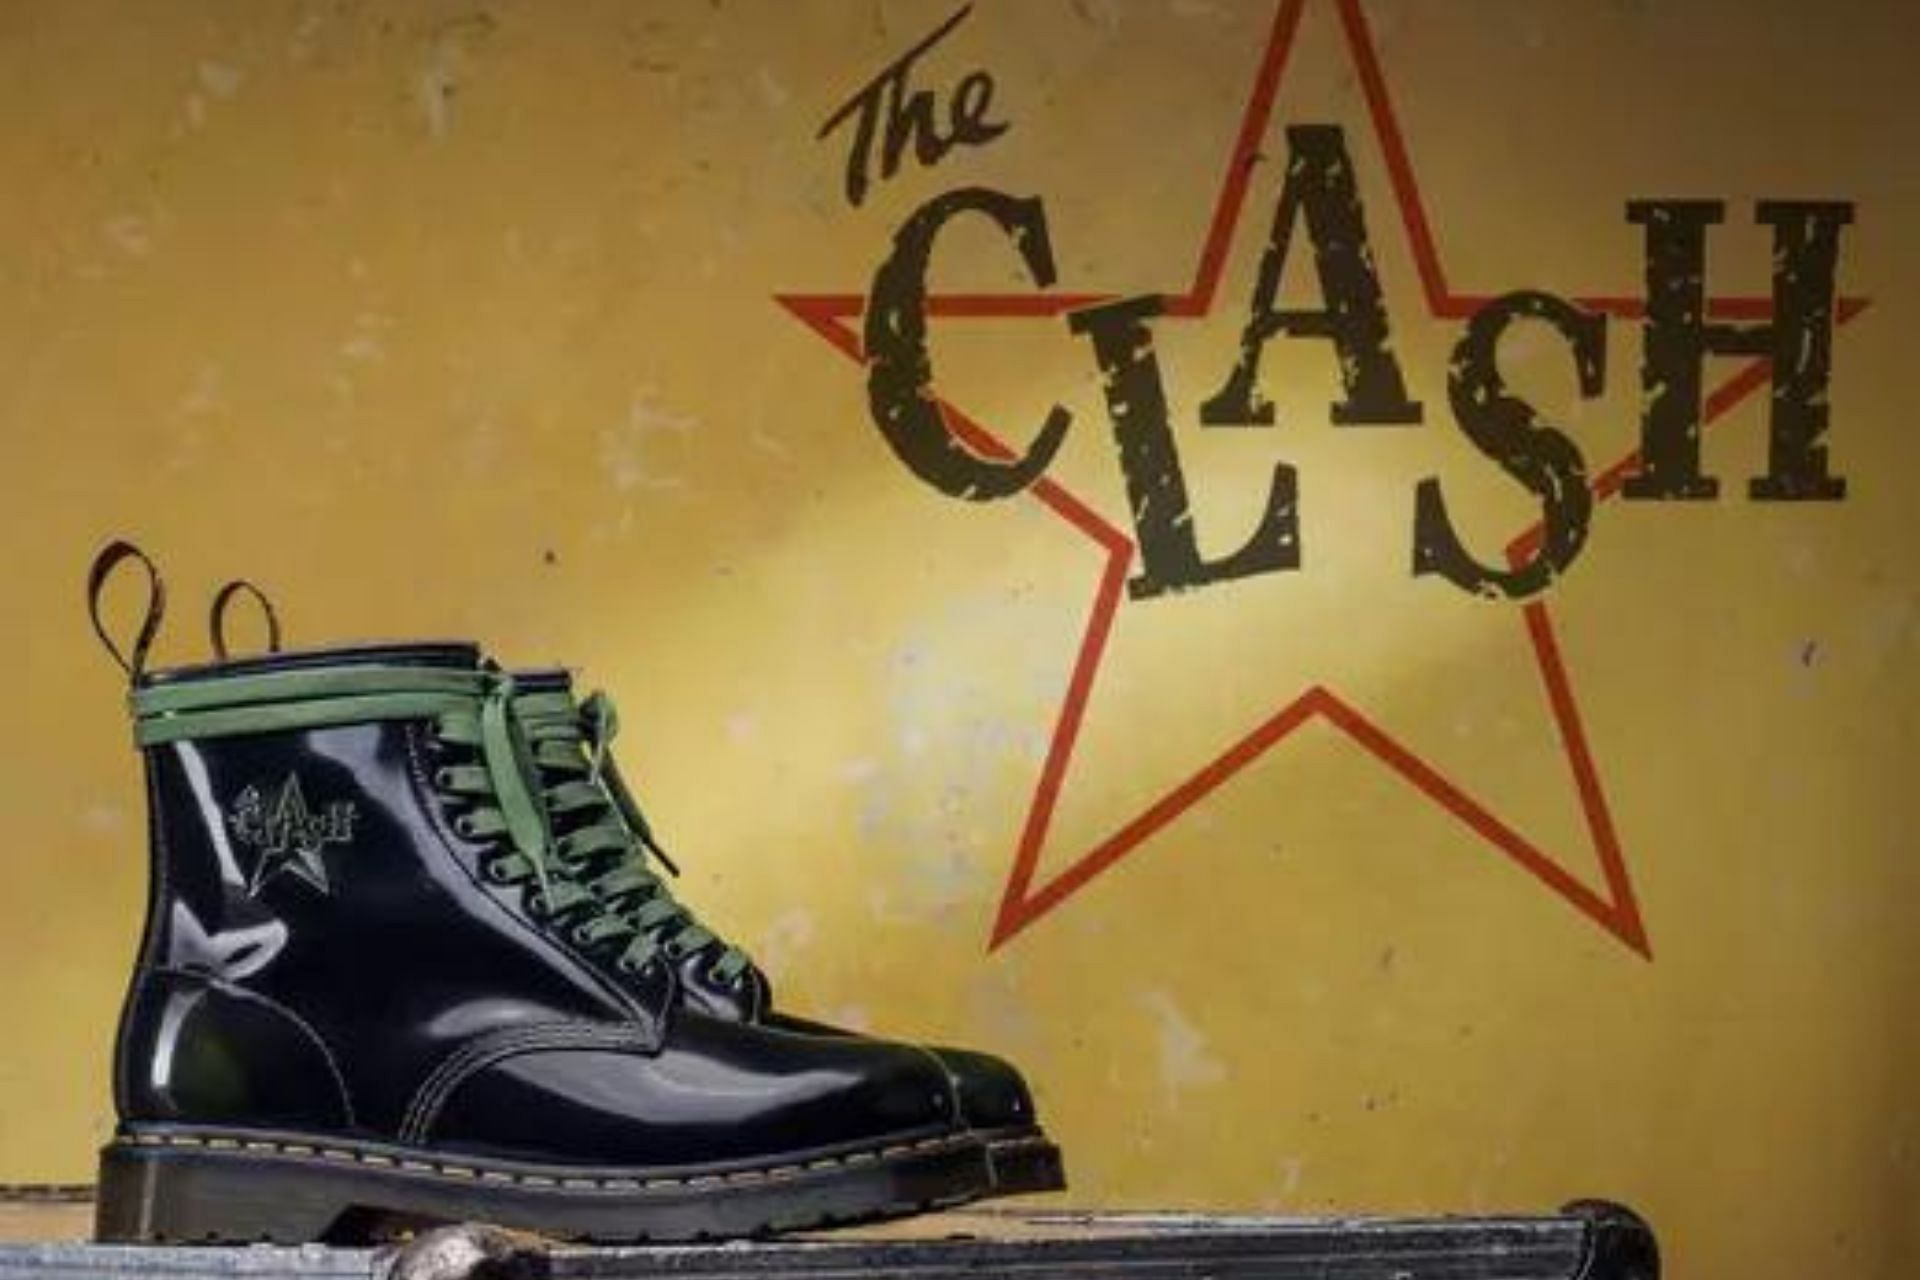 Where to buy Dr. Martens x The Clash collection? Price, release